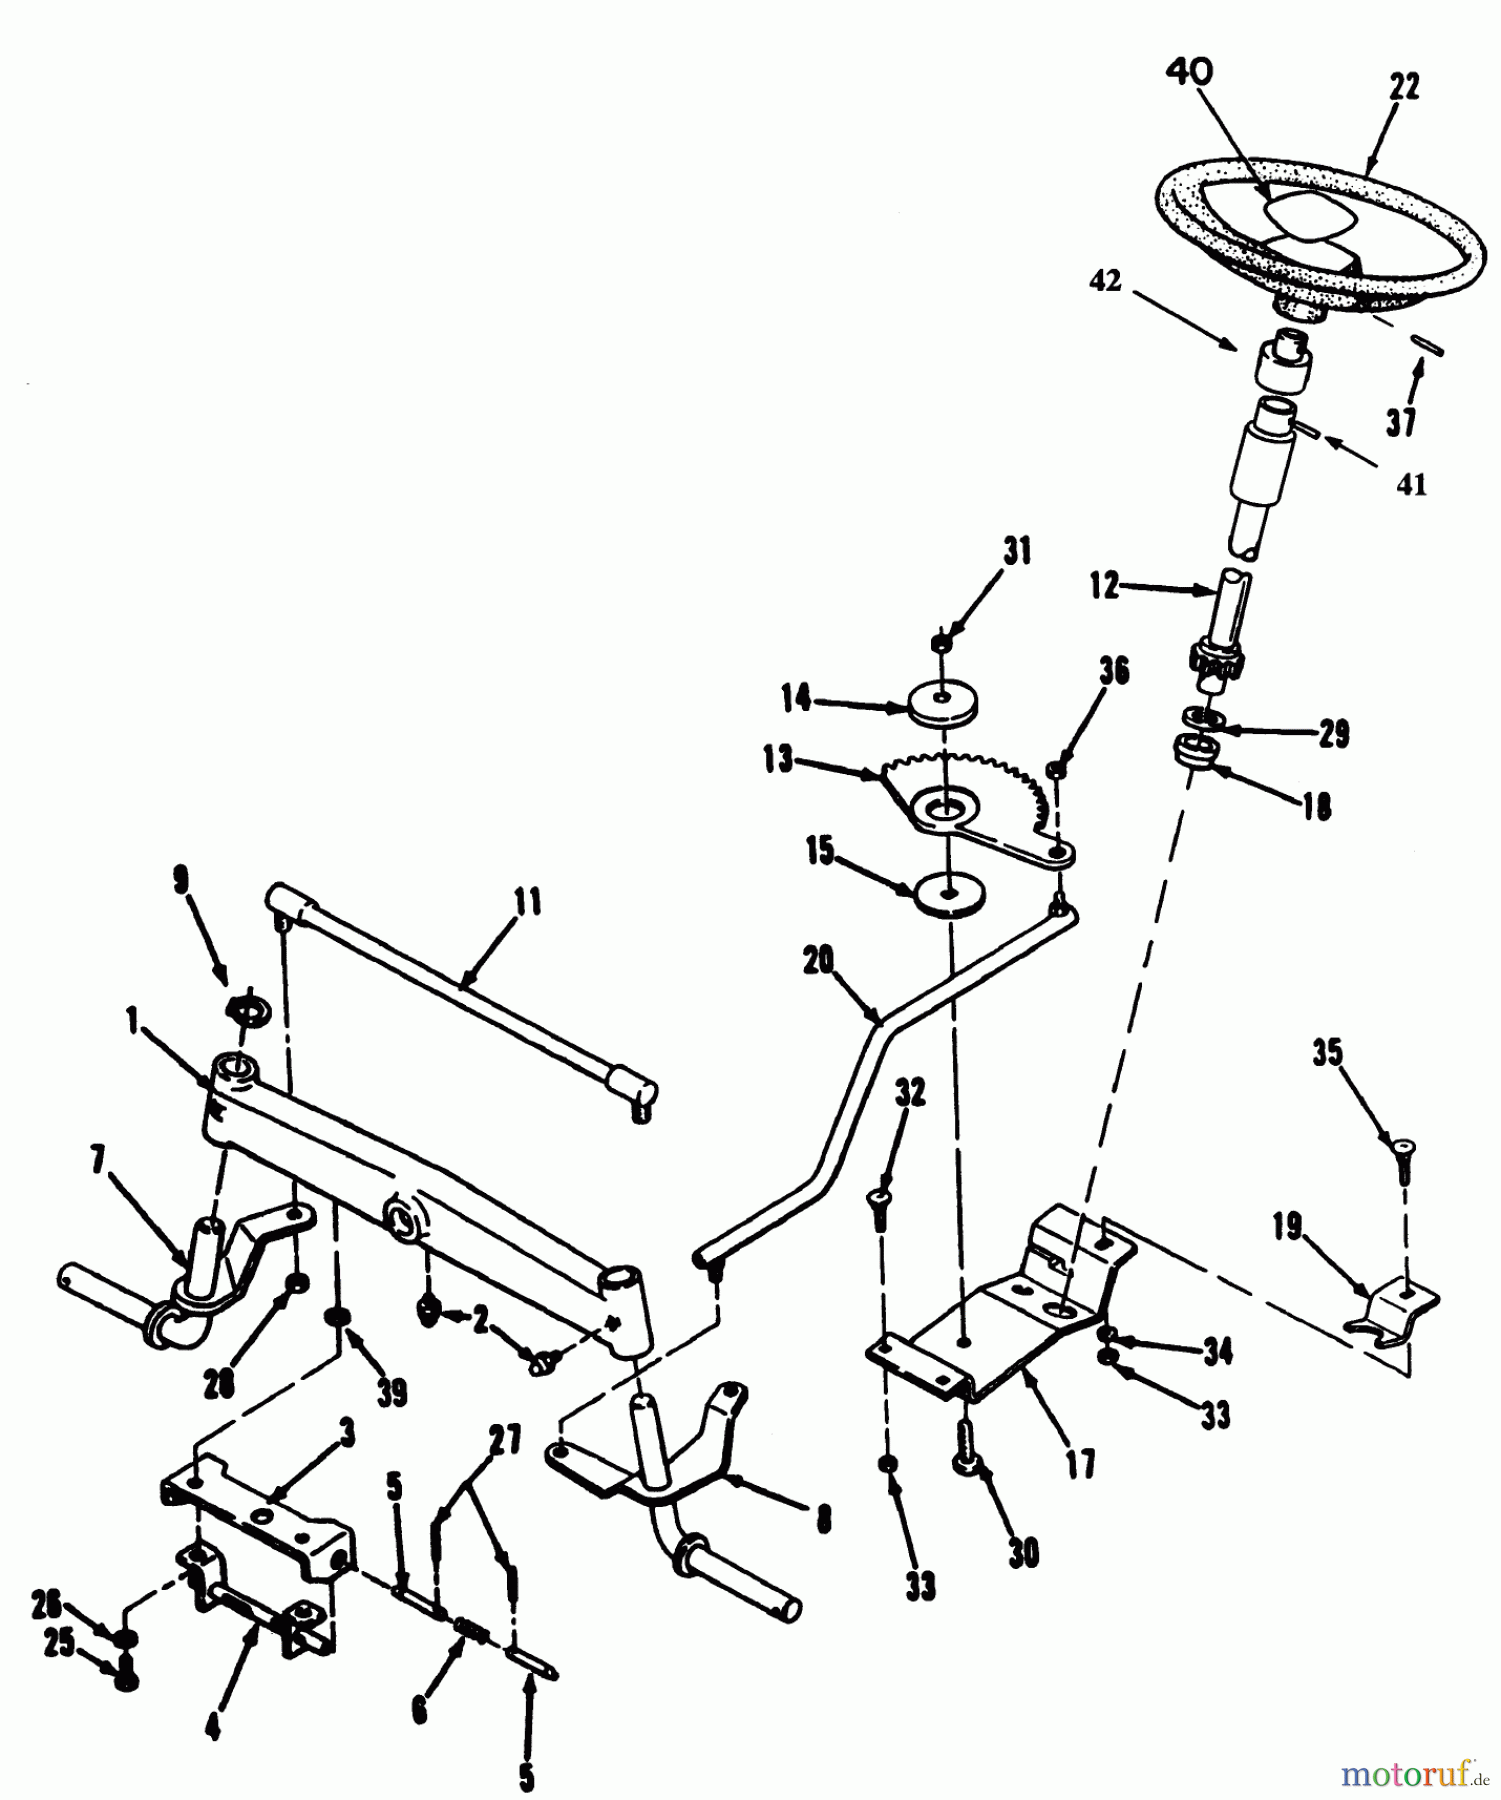  Toro Neu Mowers, Lawn & Garden Tractor Seite 1 32-10BE03 (210-H) - Toro 210-H Tractor, 1992 (2000001-2999999) FRONT AXLE & STEERING ASSEMBLY